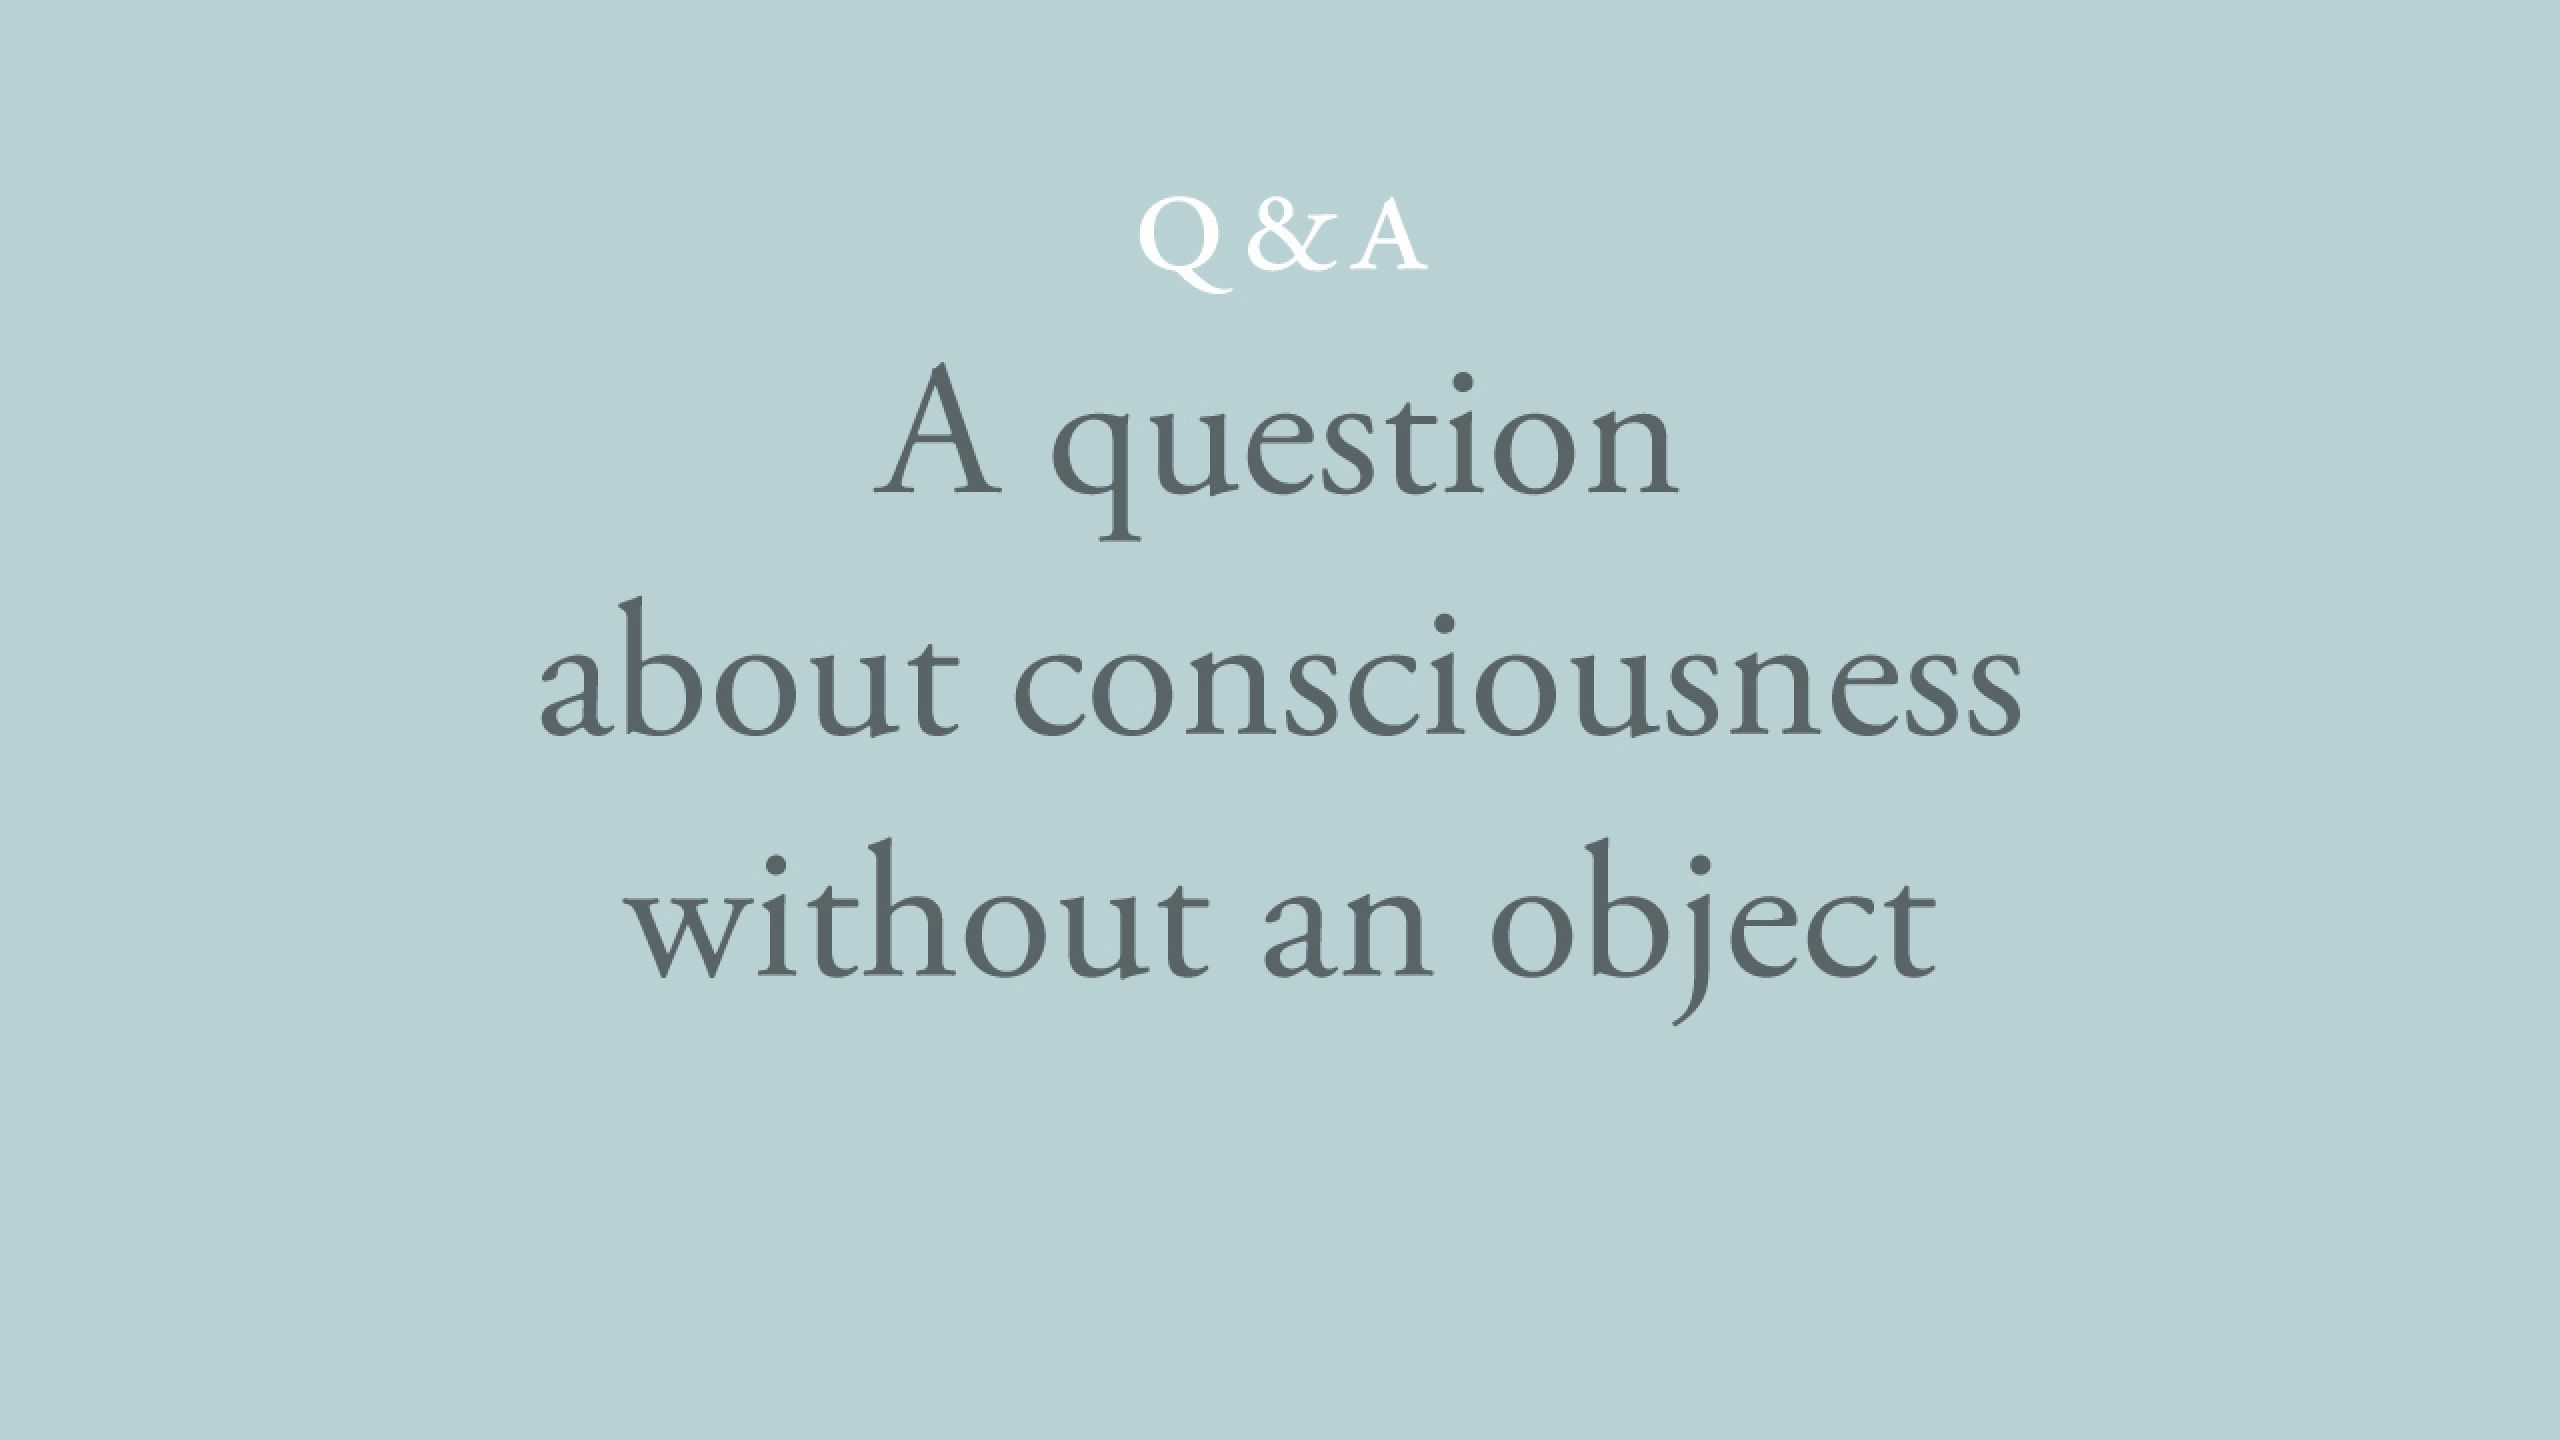 Can consciousness ever be without an object?